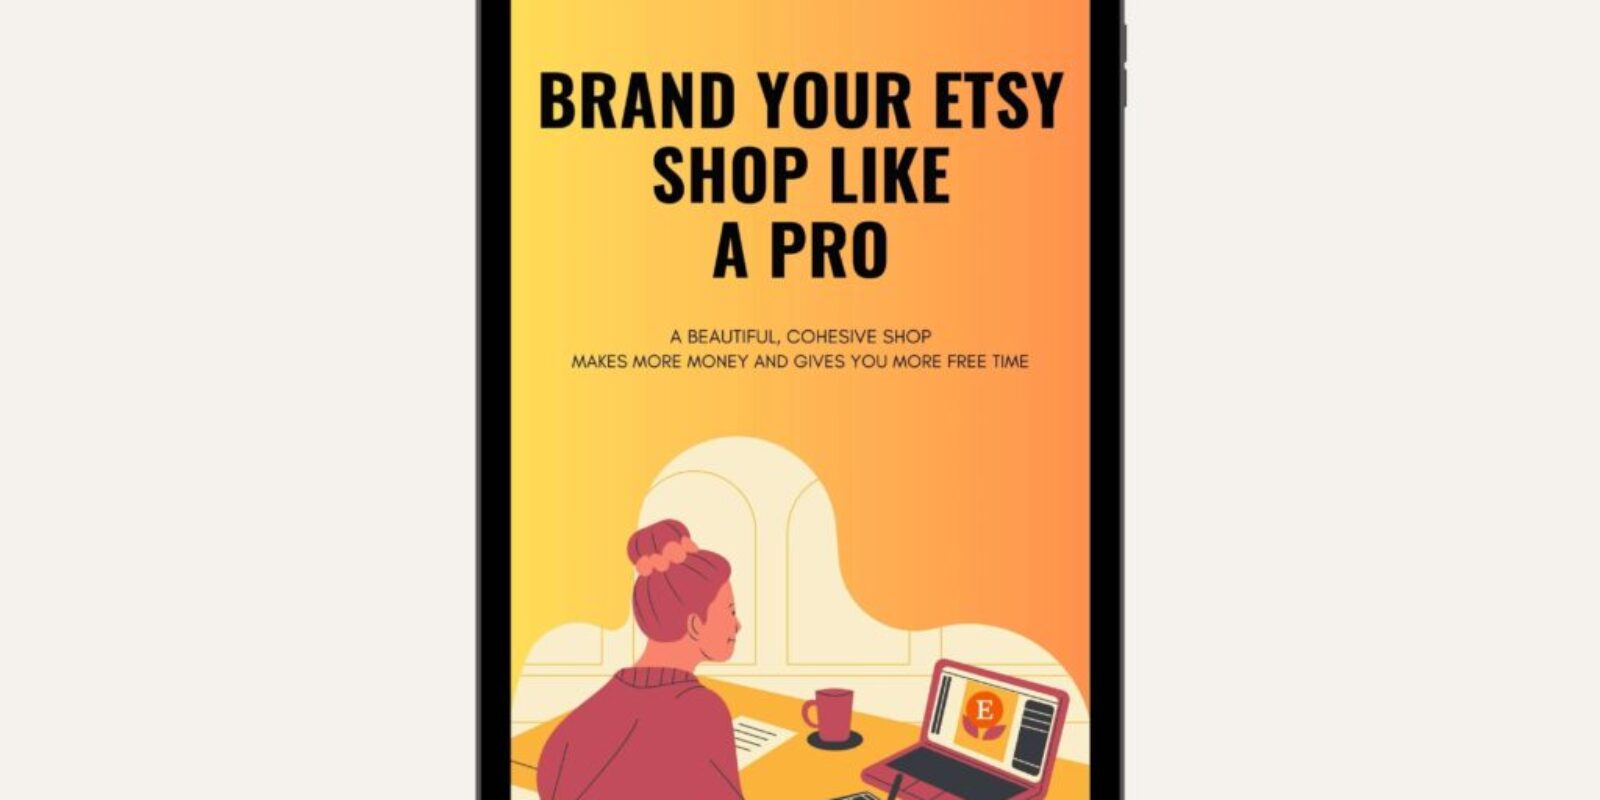 brand your etsy shop like a pro (1)